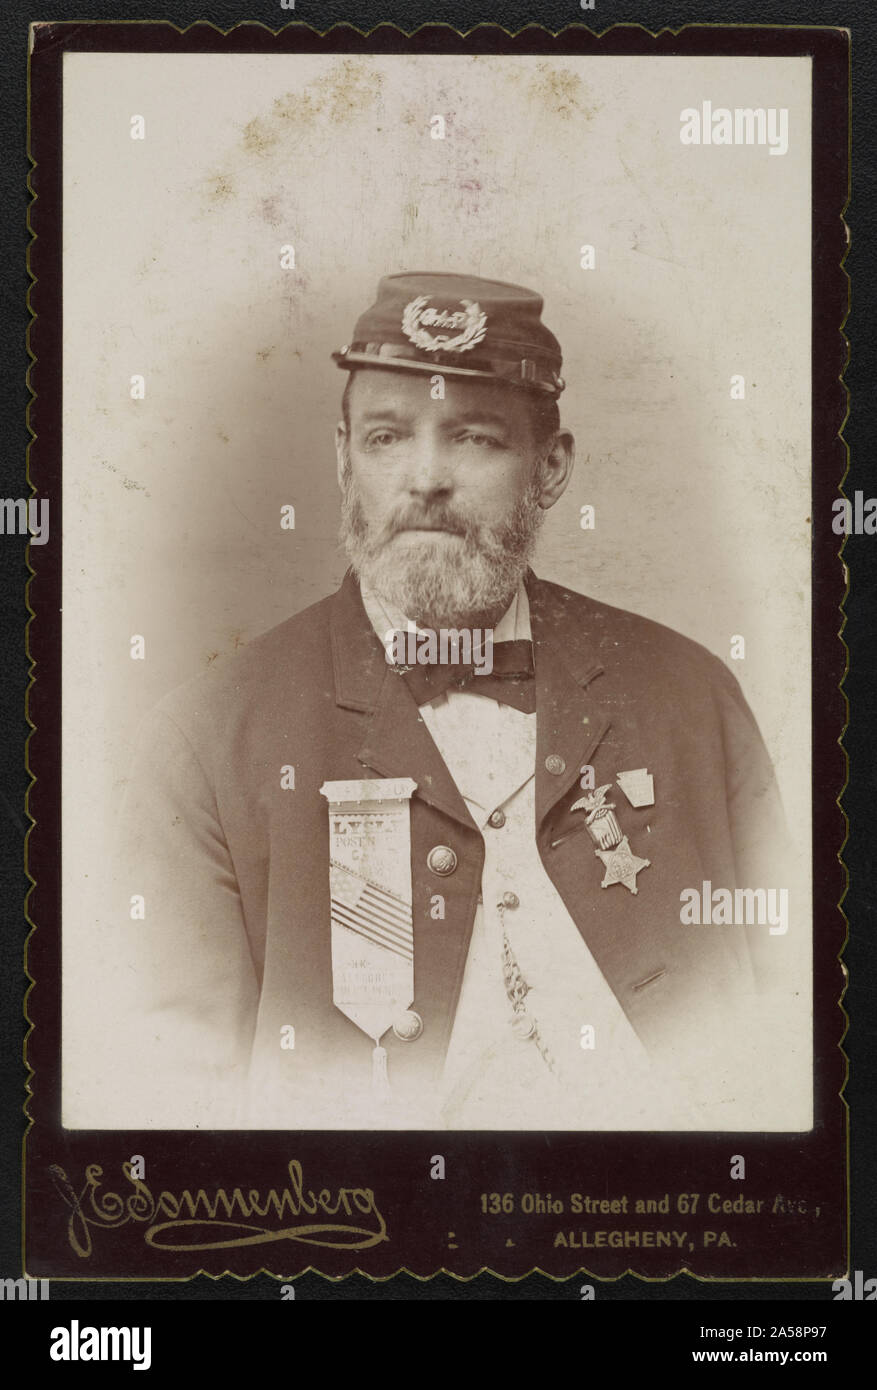 Unidentified Civil War veteran from Grand Army of the Republic Lt. James M. Lysle Post No. 128 in uniform with medals] / Sonnenberg, artist and photographer, 136 Ohio St. & 67 Cedar Ave., Allegheny, Pa. Stock Photo